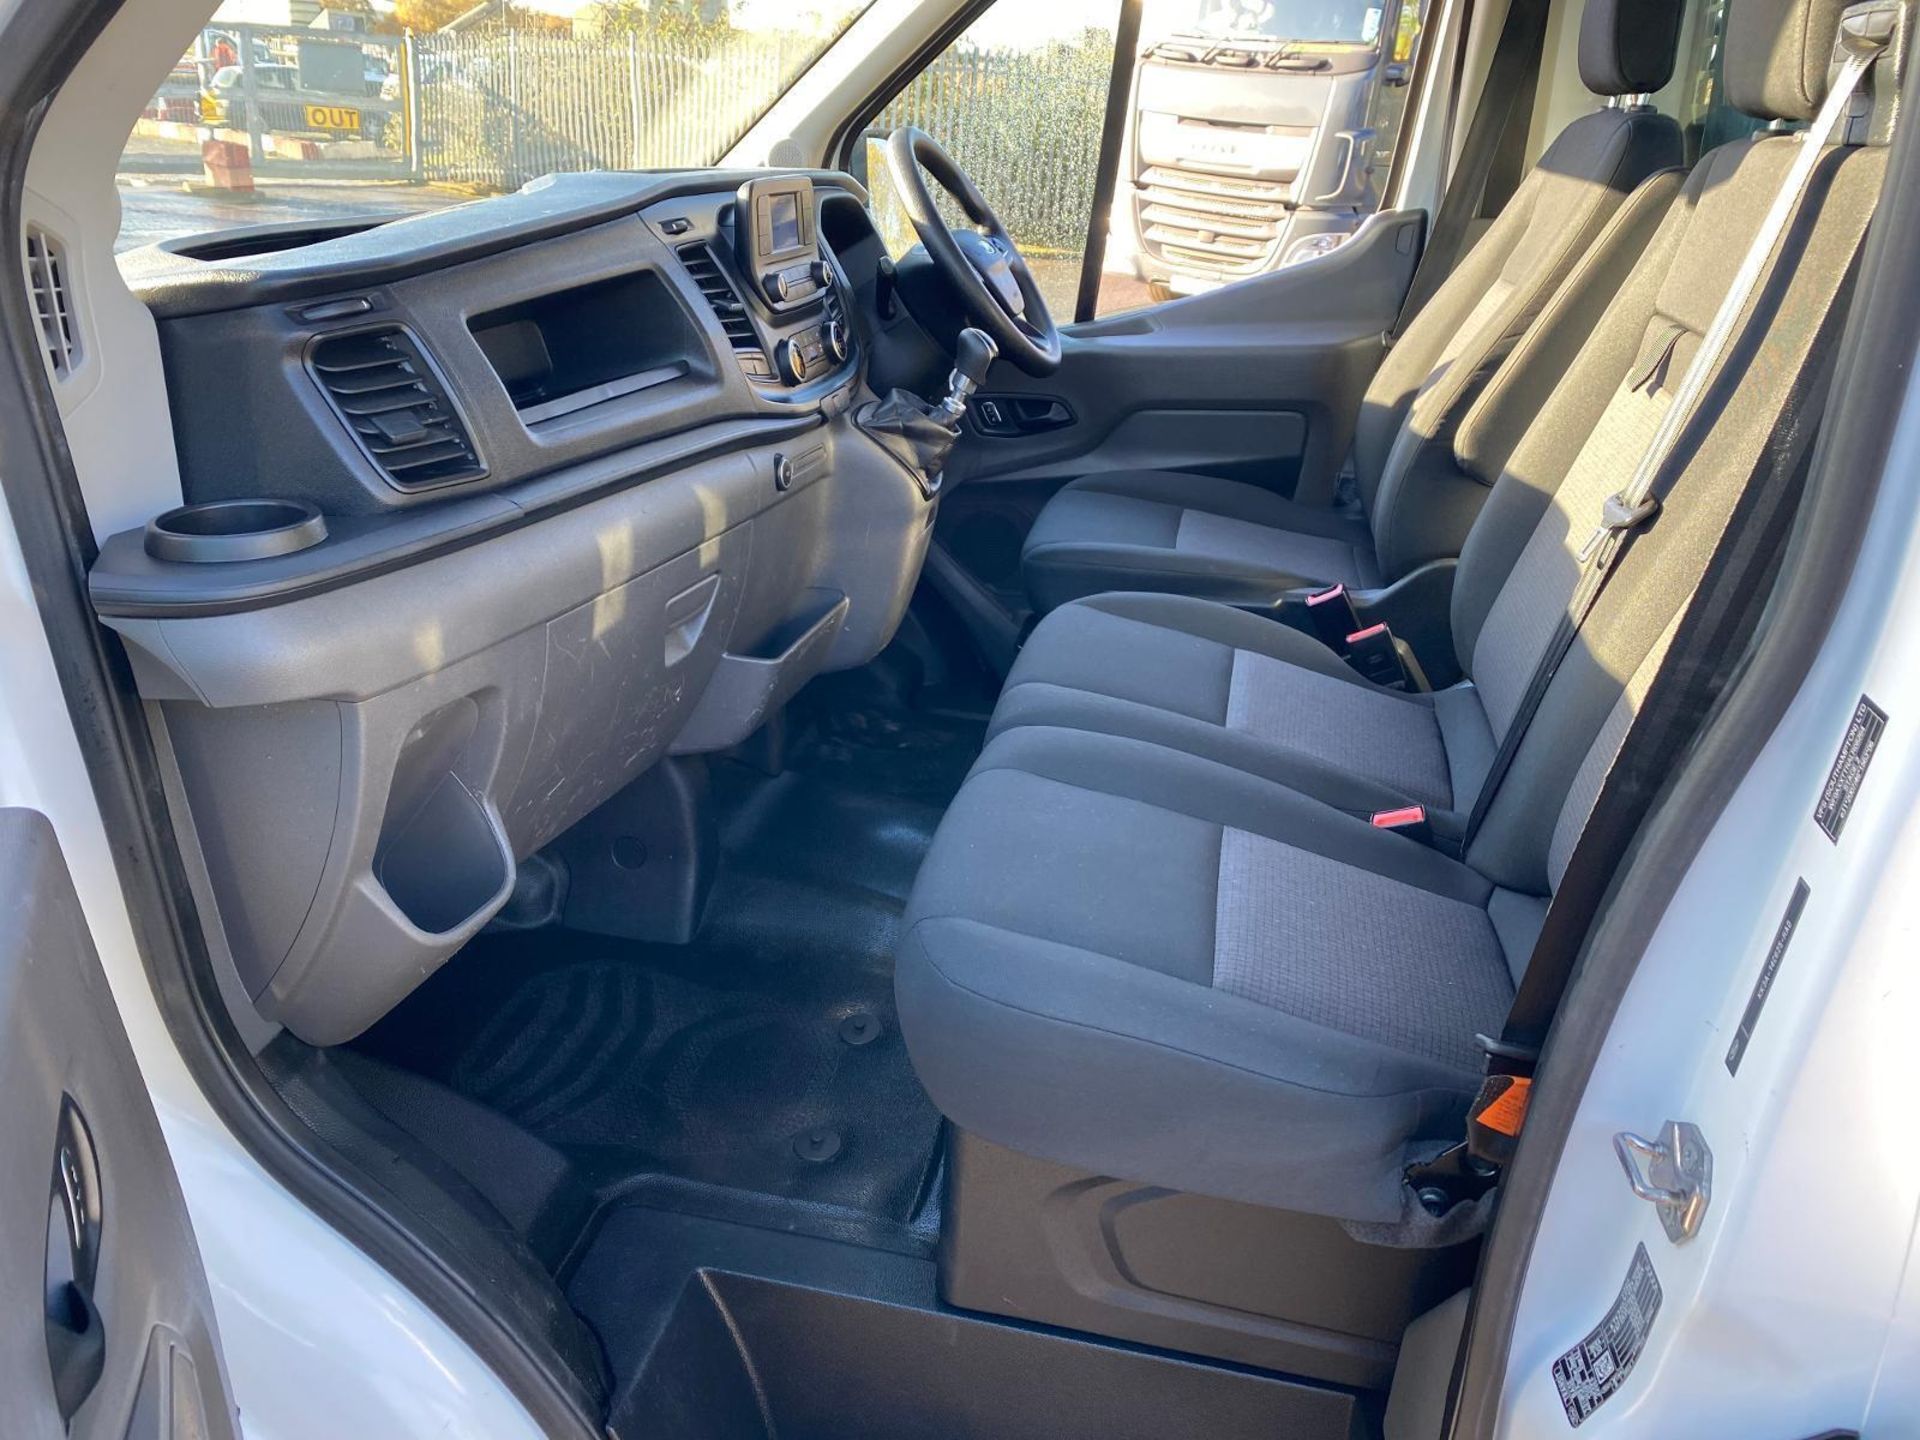 2020 FORD TRANSIT 350: RUGGED ELEGANCE IN A TWIN-WHEEL DROPSIDE - Image 11 of 12